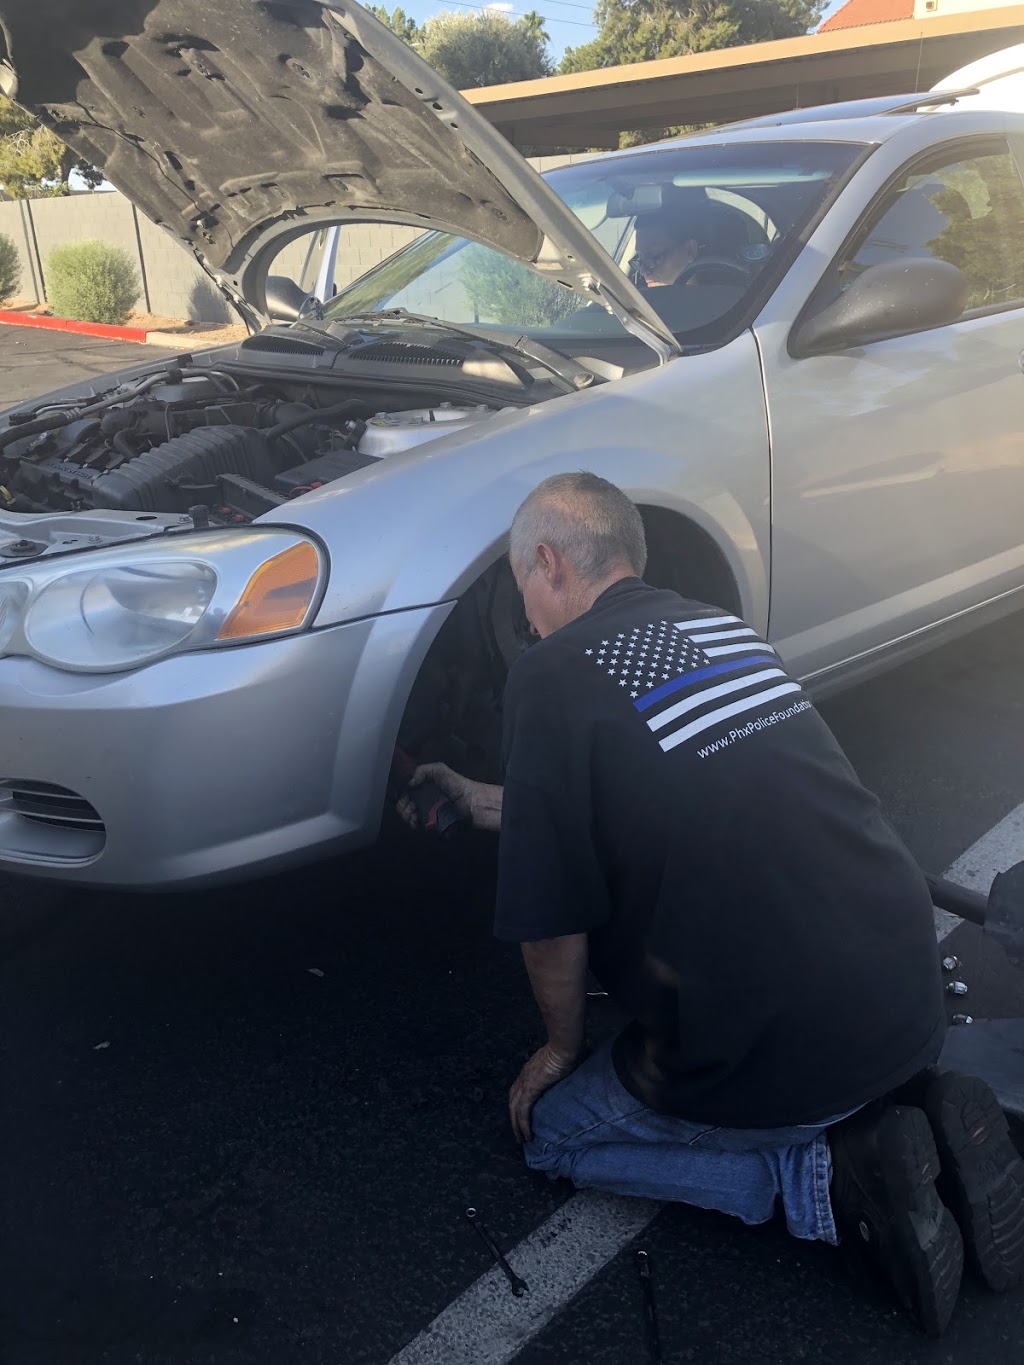 Deuces wild mobile auto repair | Strictly a mobile service I come to you, Valley wide service, Glendale, AZ 85308, USA | Phone: (602) 435-9907